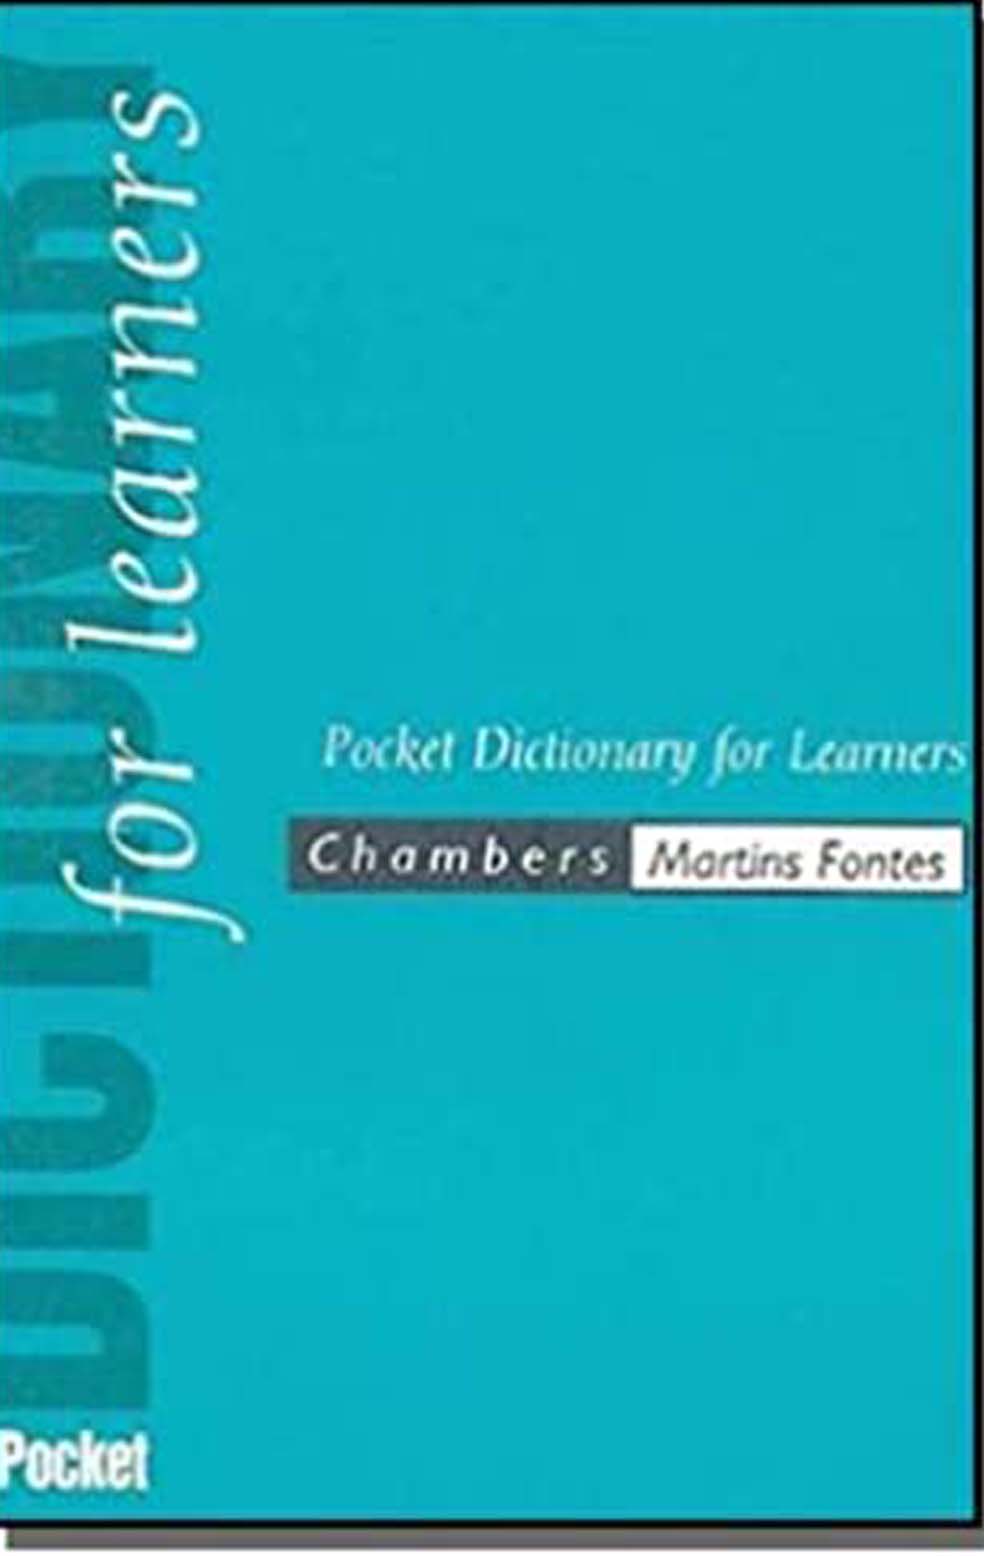 Chambers - Pocket Dictionary for Learners